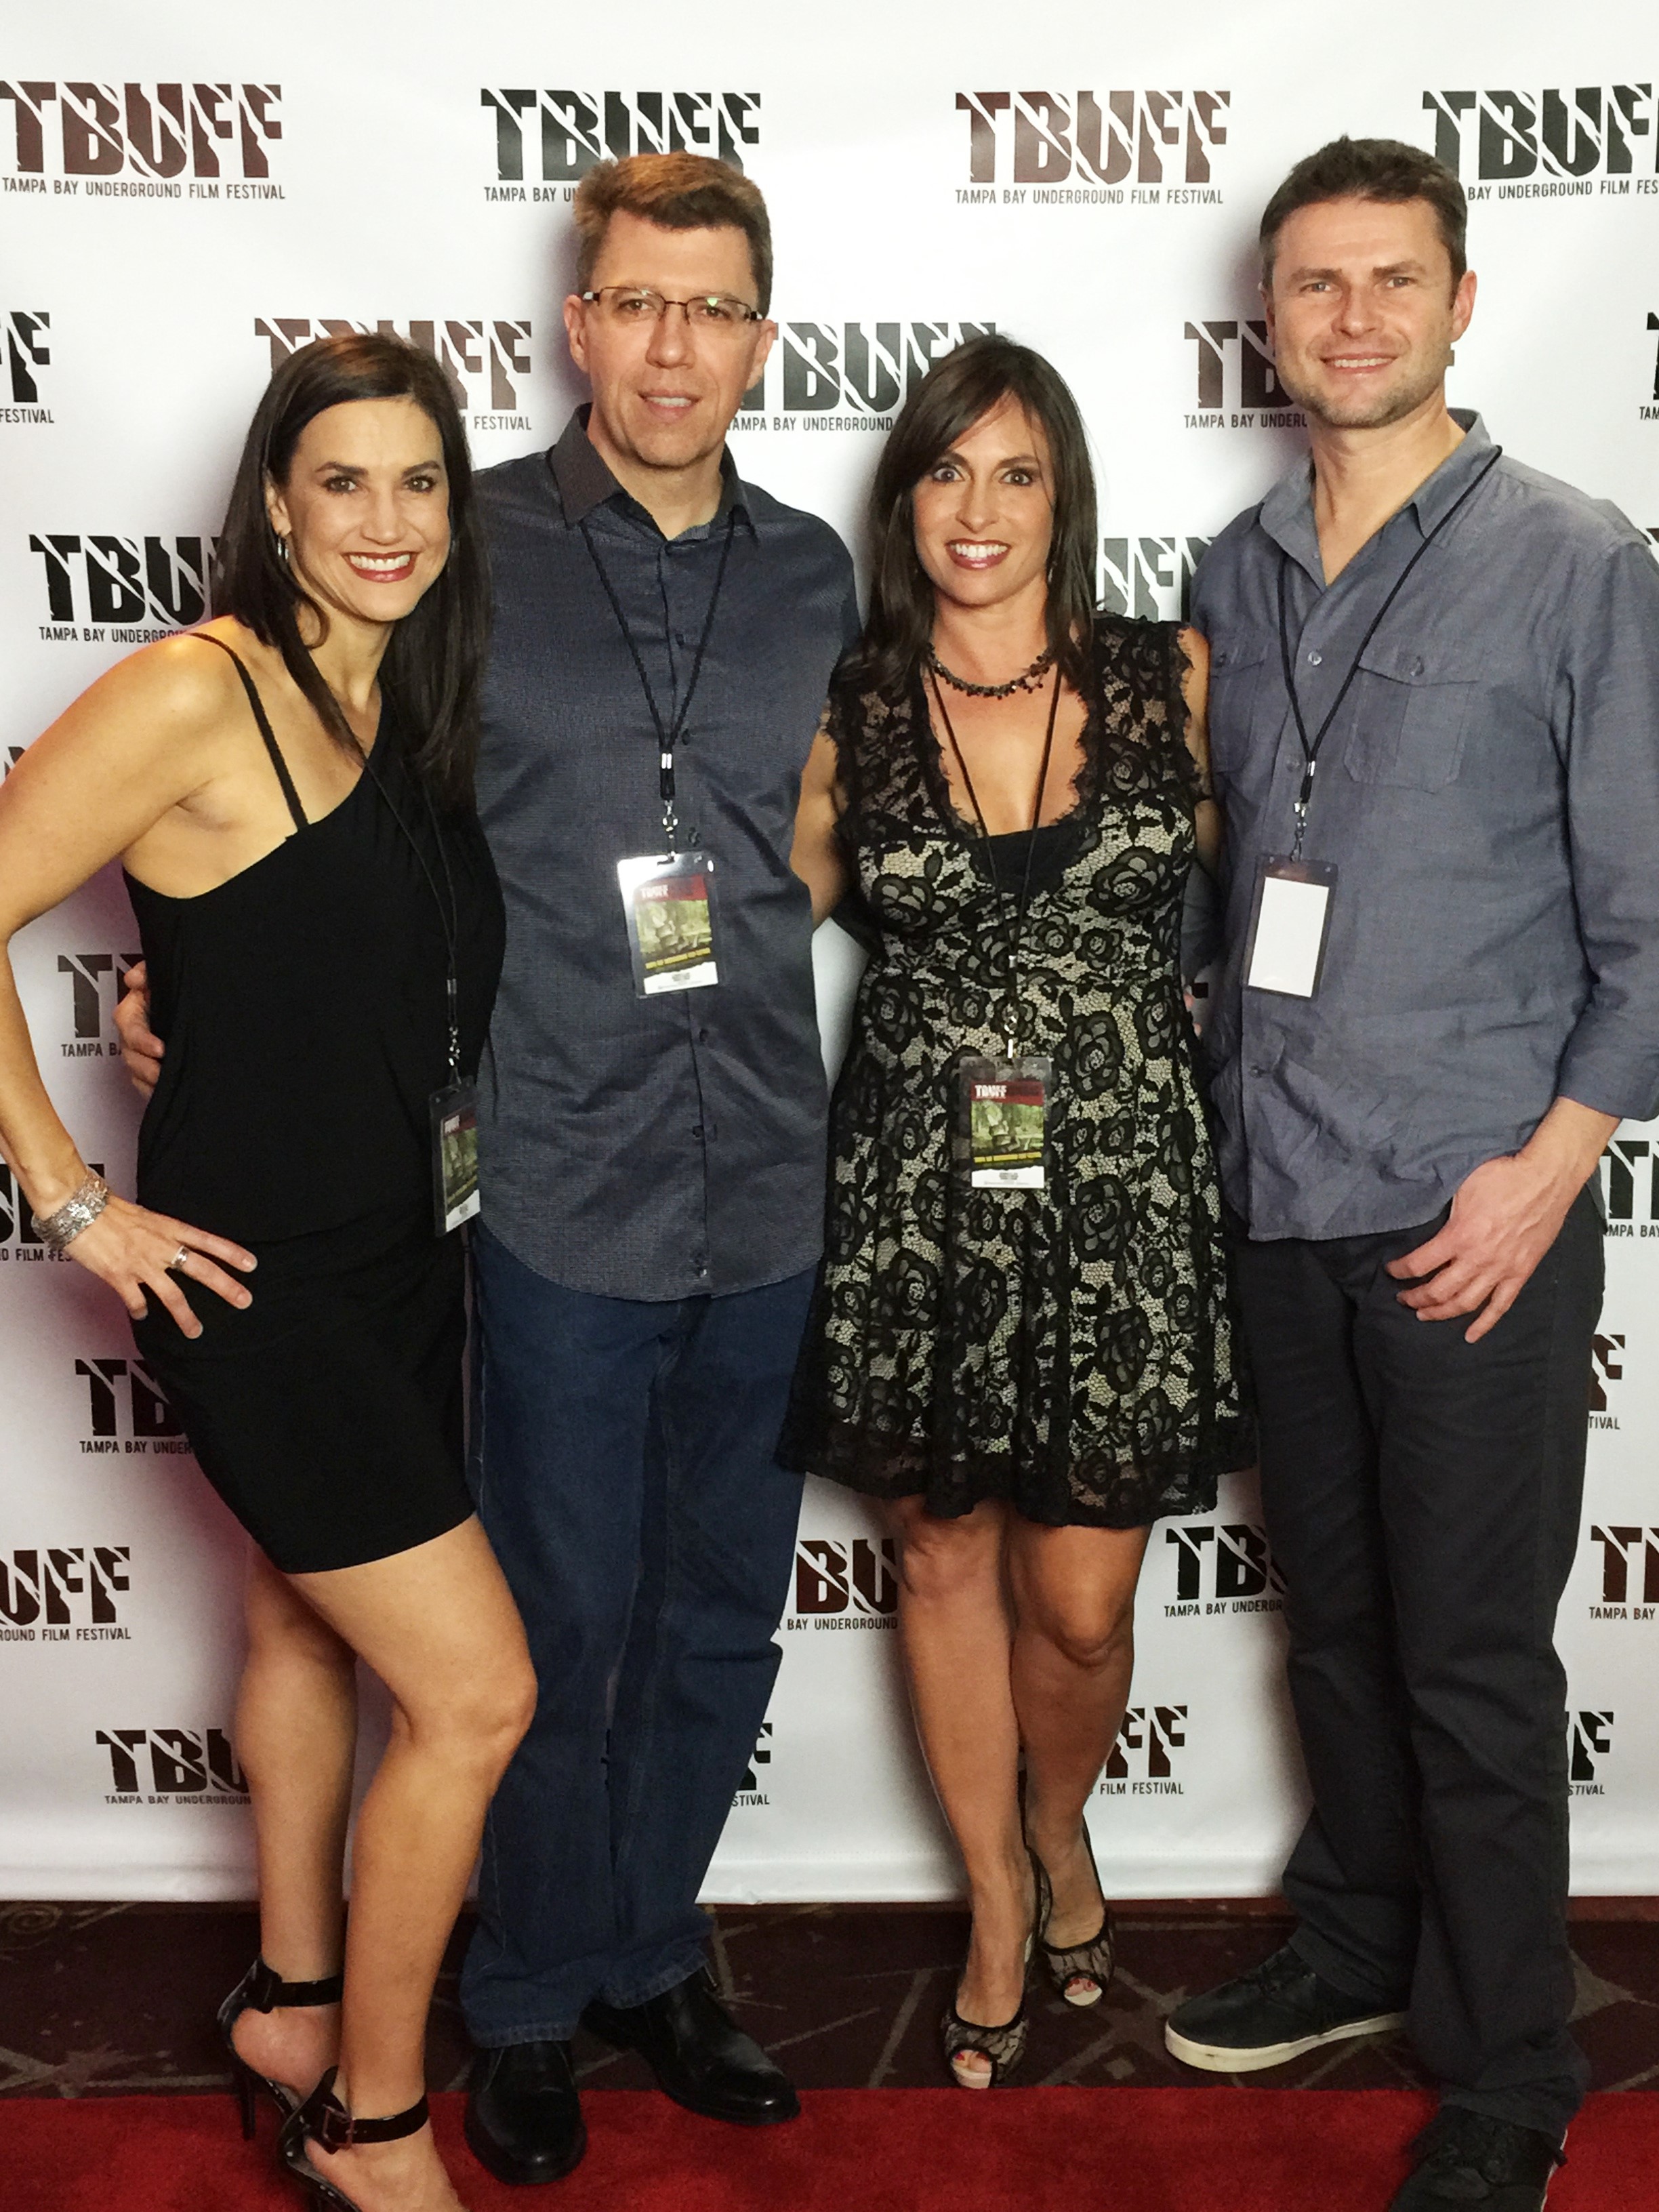 Wade Ballance and Mark Kochanowicz with Tampa Bay Underground Film Festival (TBUFF) organizers (Kelly & Chris) for the screening of Assumption of Risk (2014).